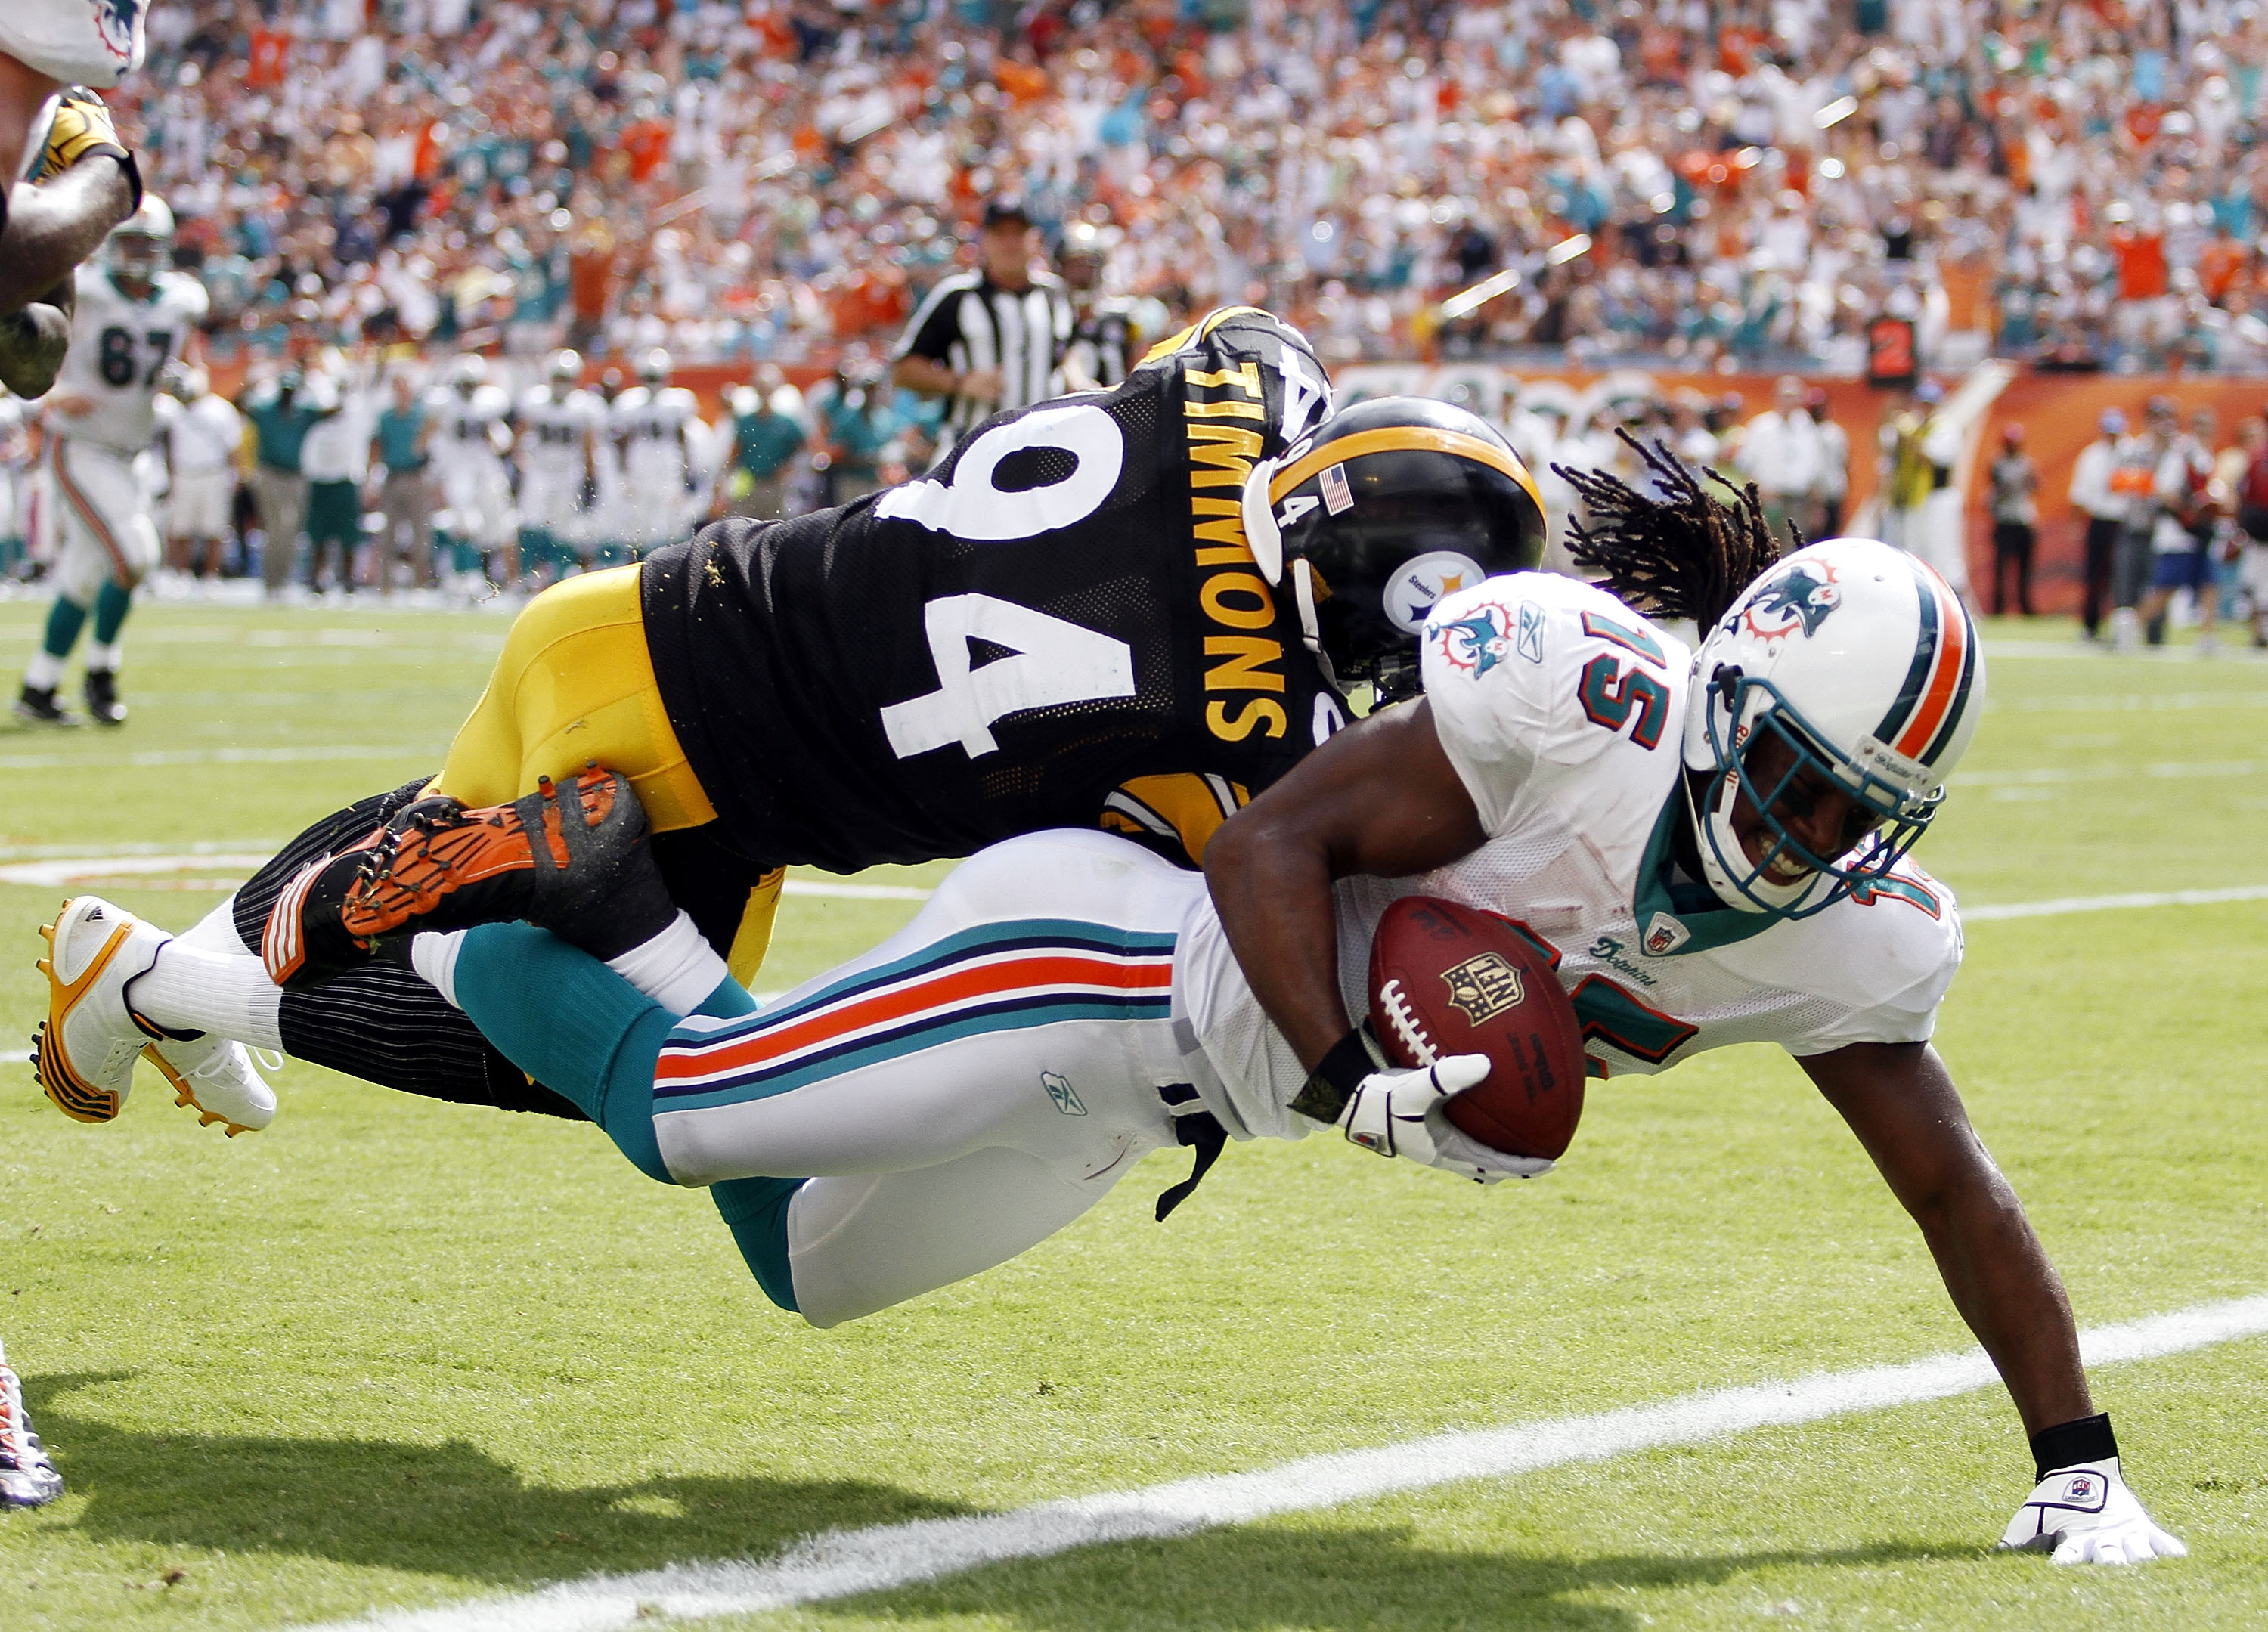 Pittsburgh Steelers vs. Miami Dolphins highlights